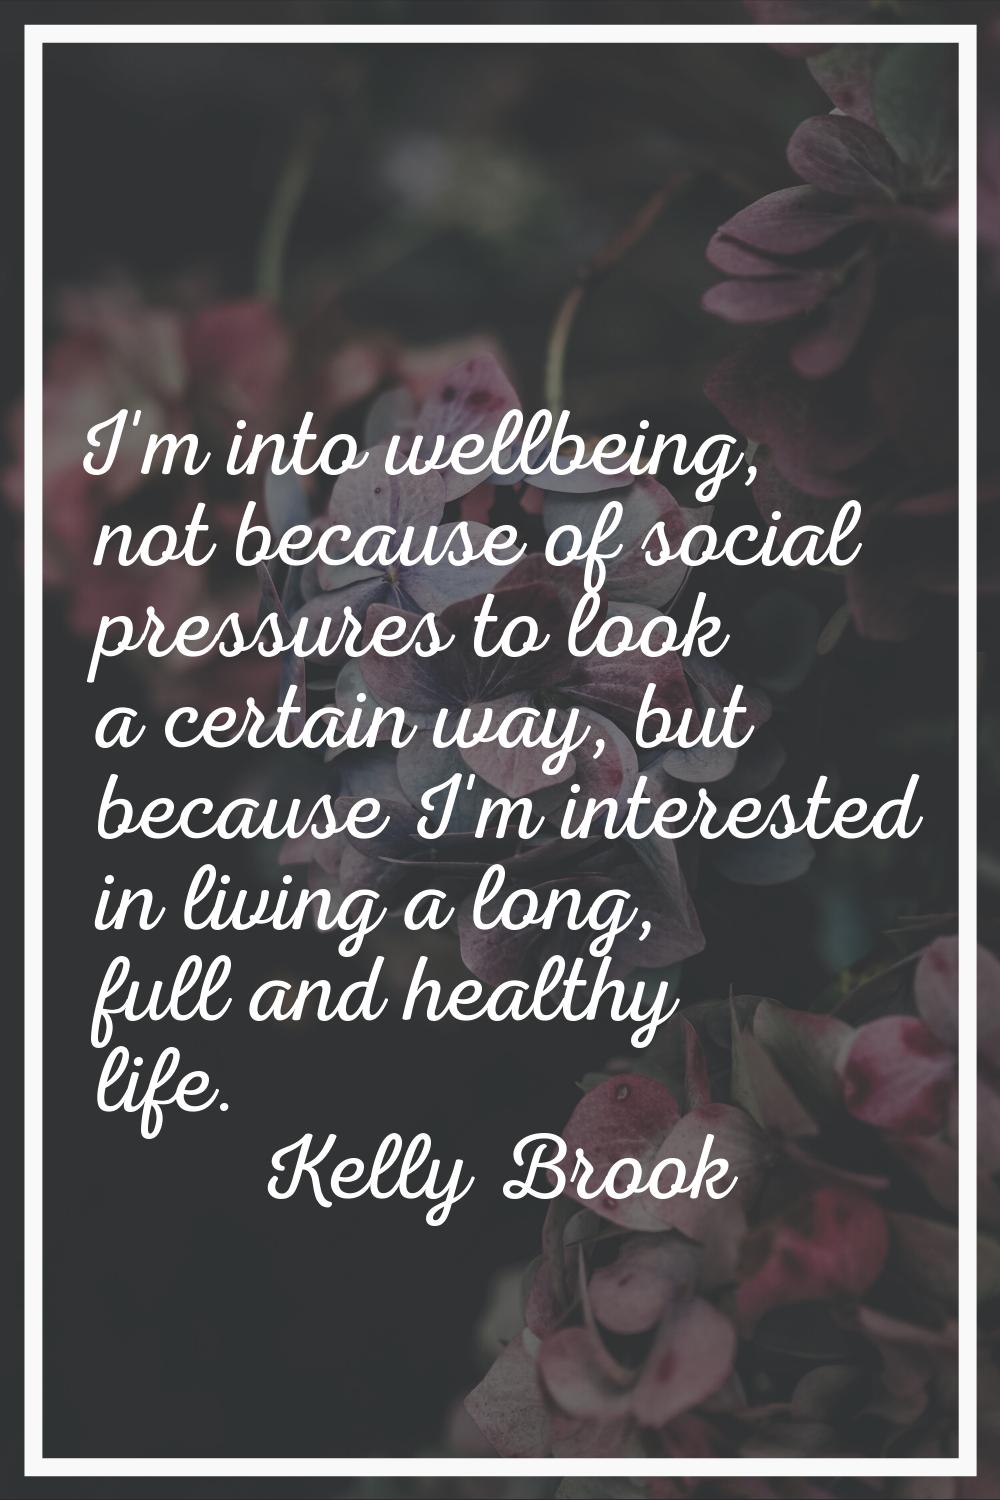 I'm into wellbeing, not because of social pressures to look a certain way, but because I'm interest